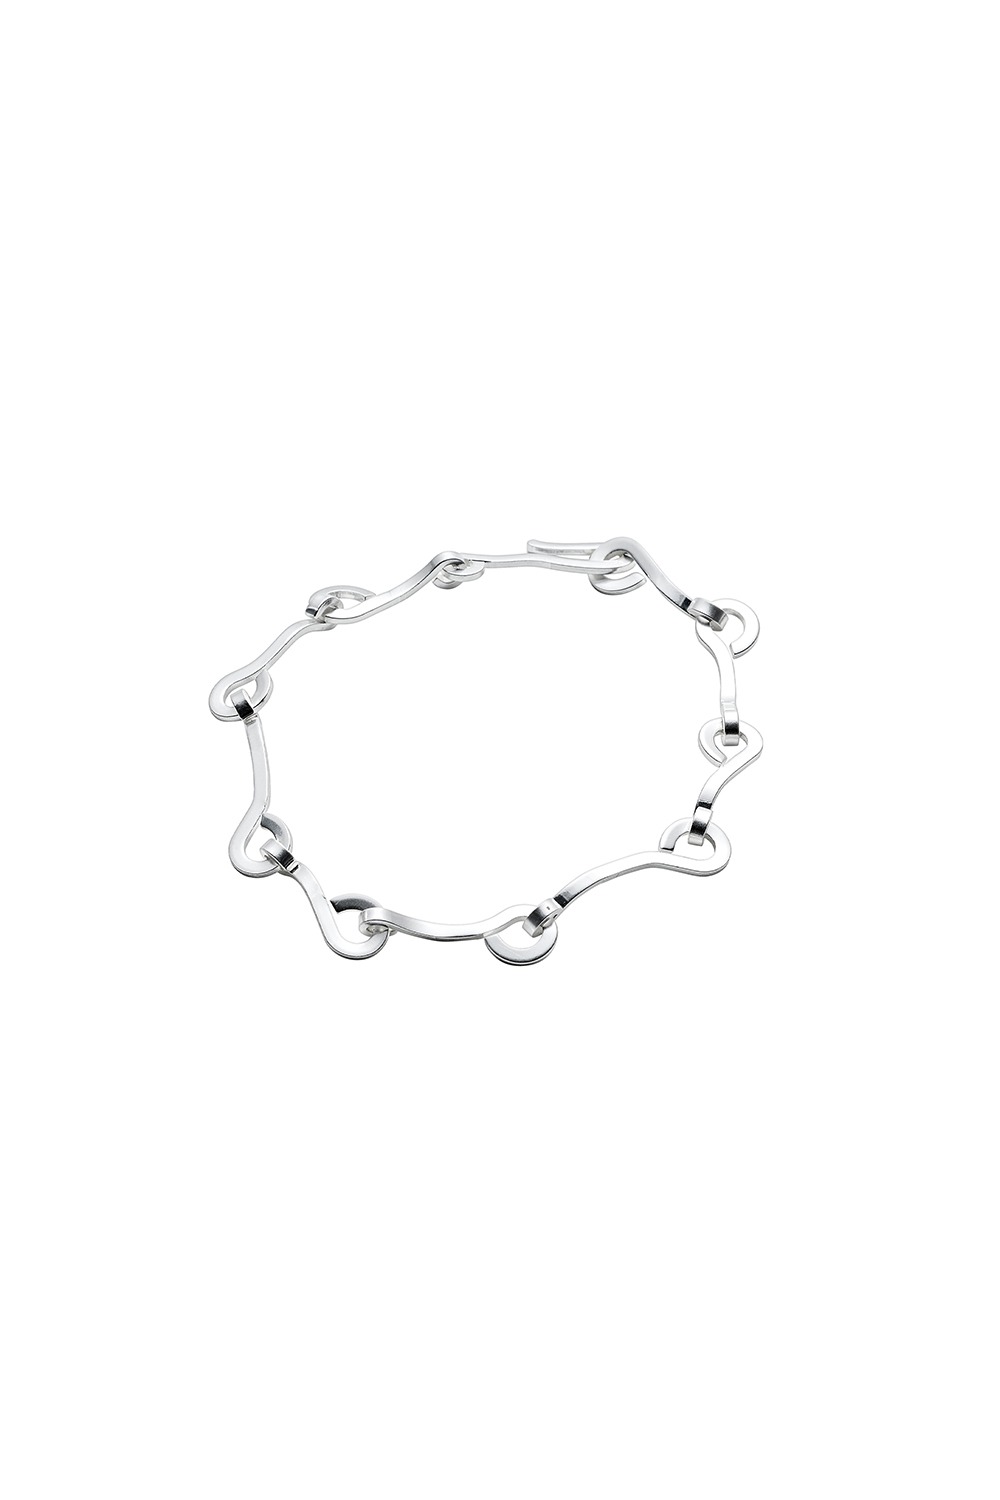 RU SHUO X LOW CLASSIC LOW CHAIN ANKLET - SILVER